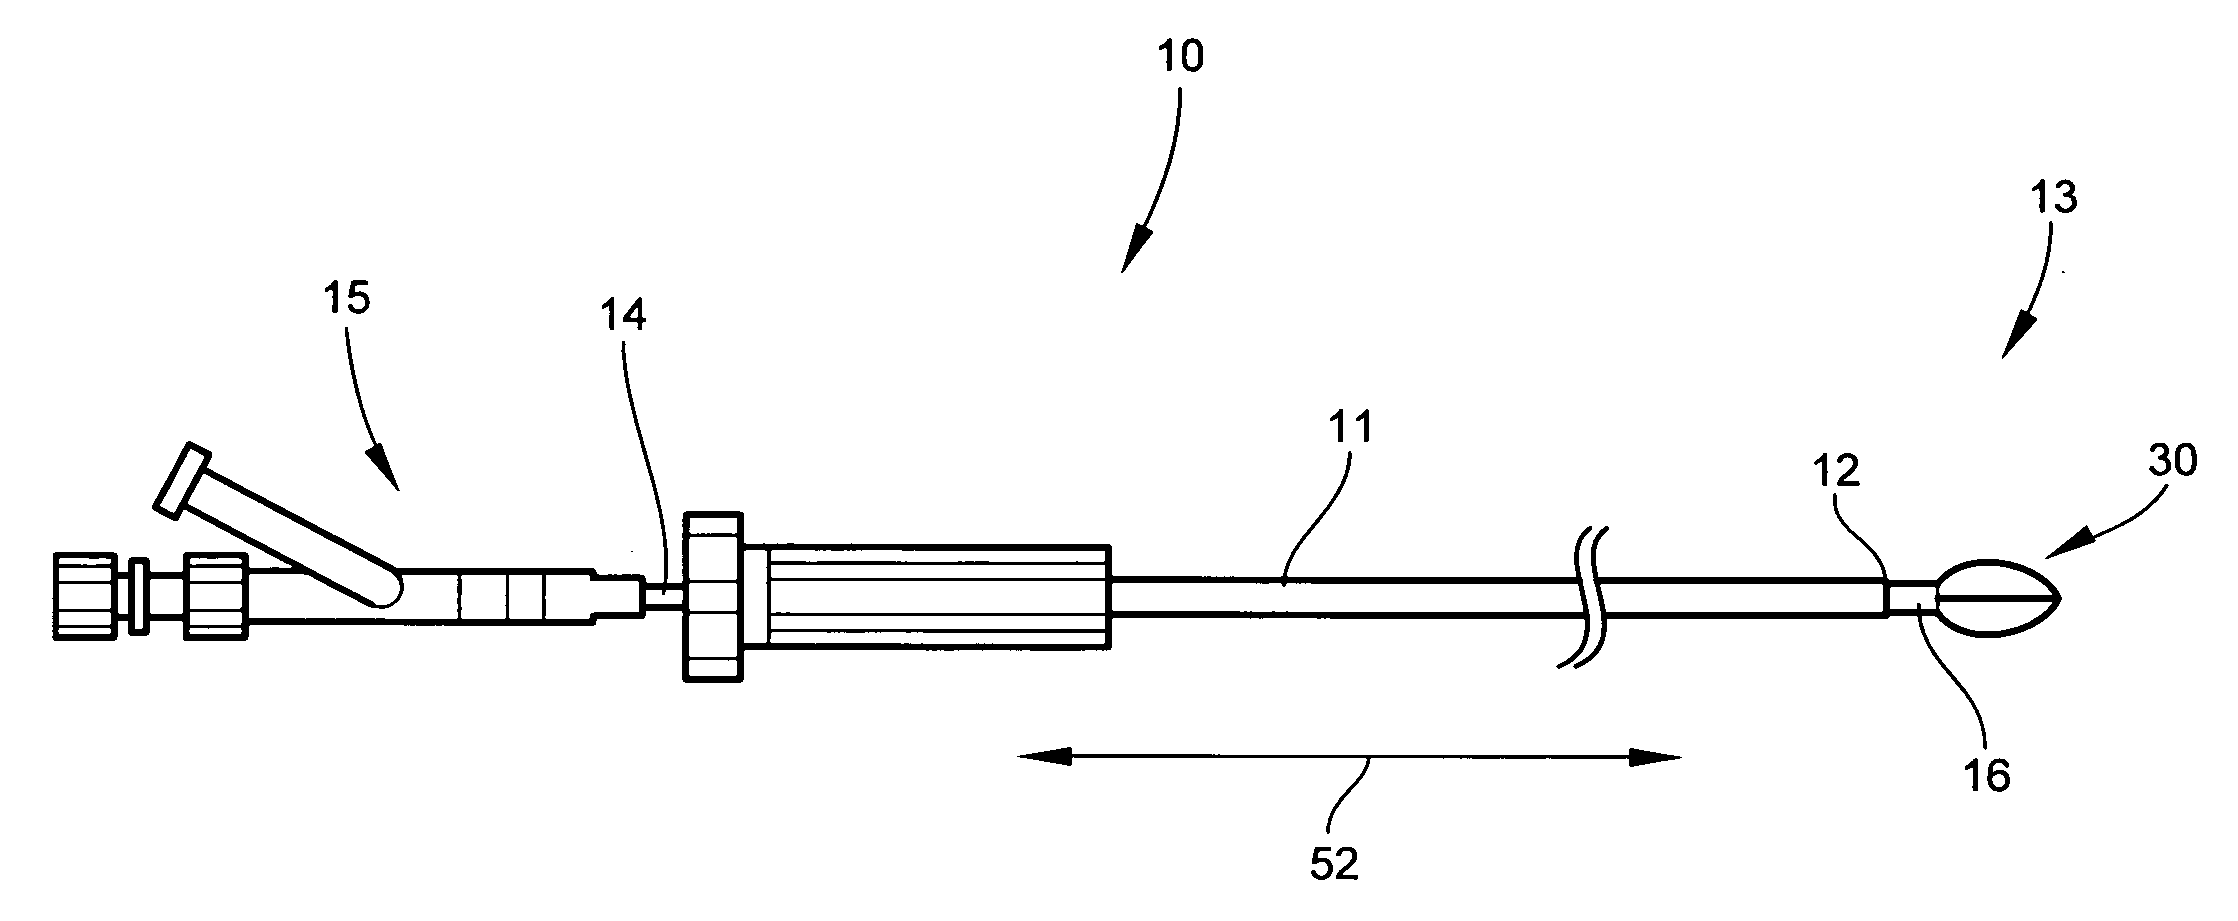 Bone barrier device, system, and method